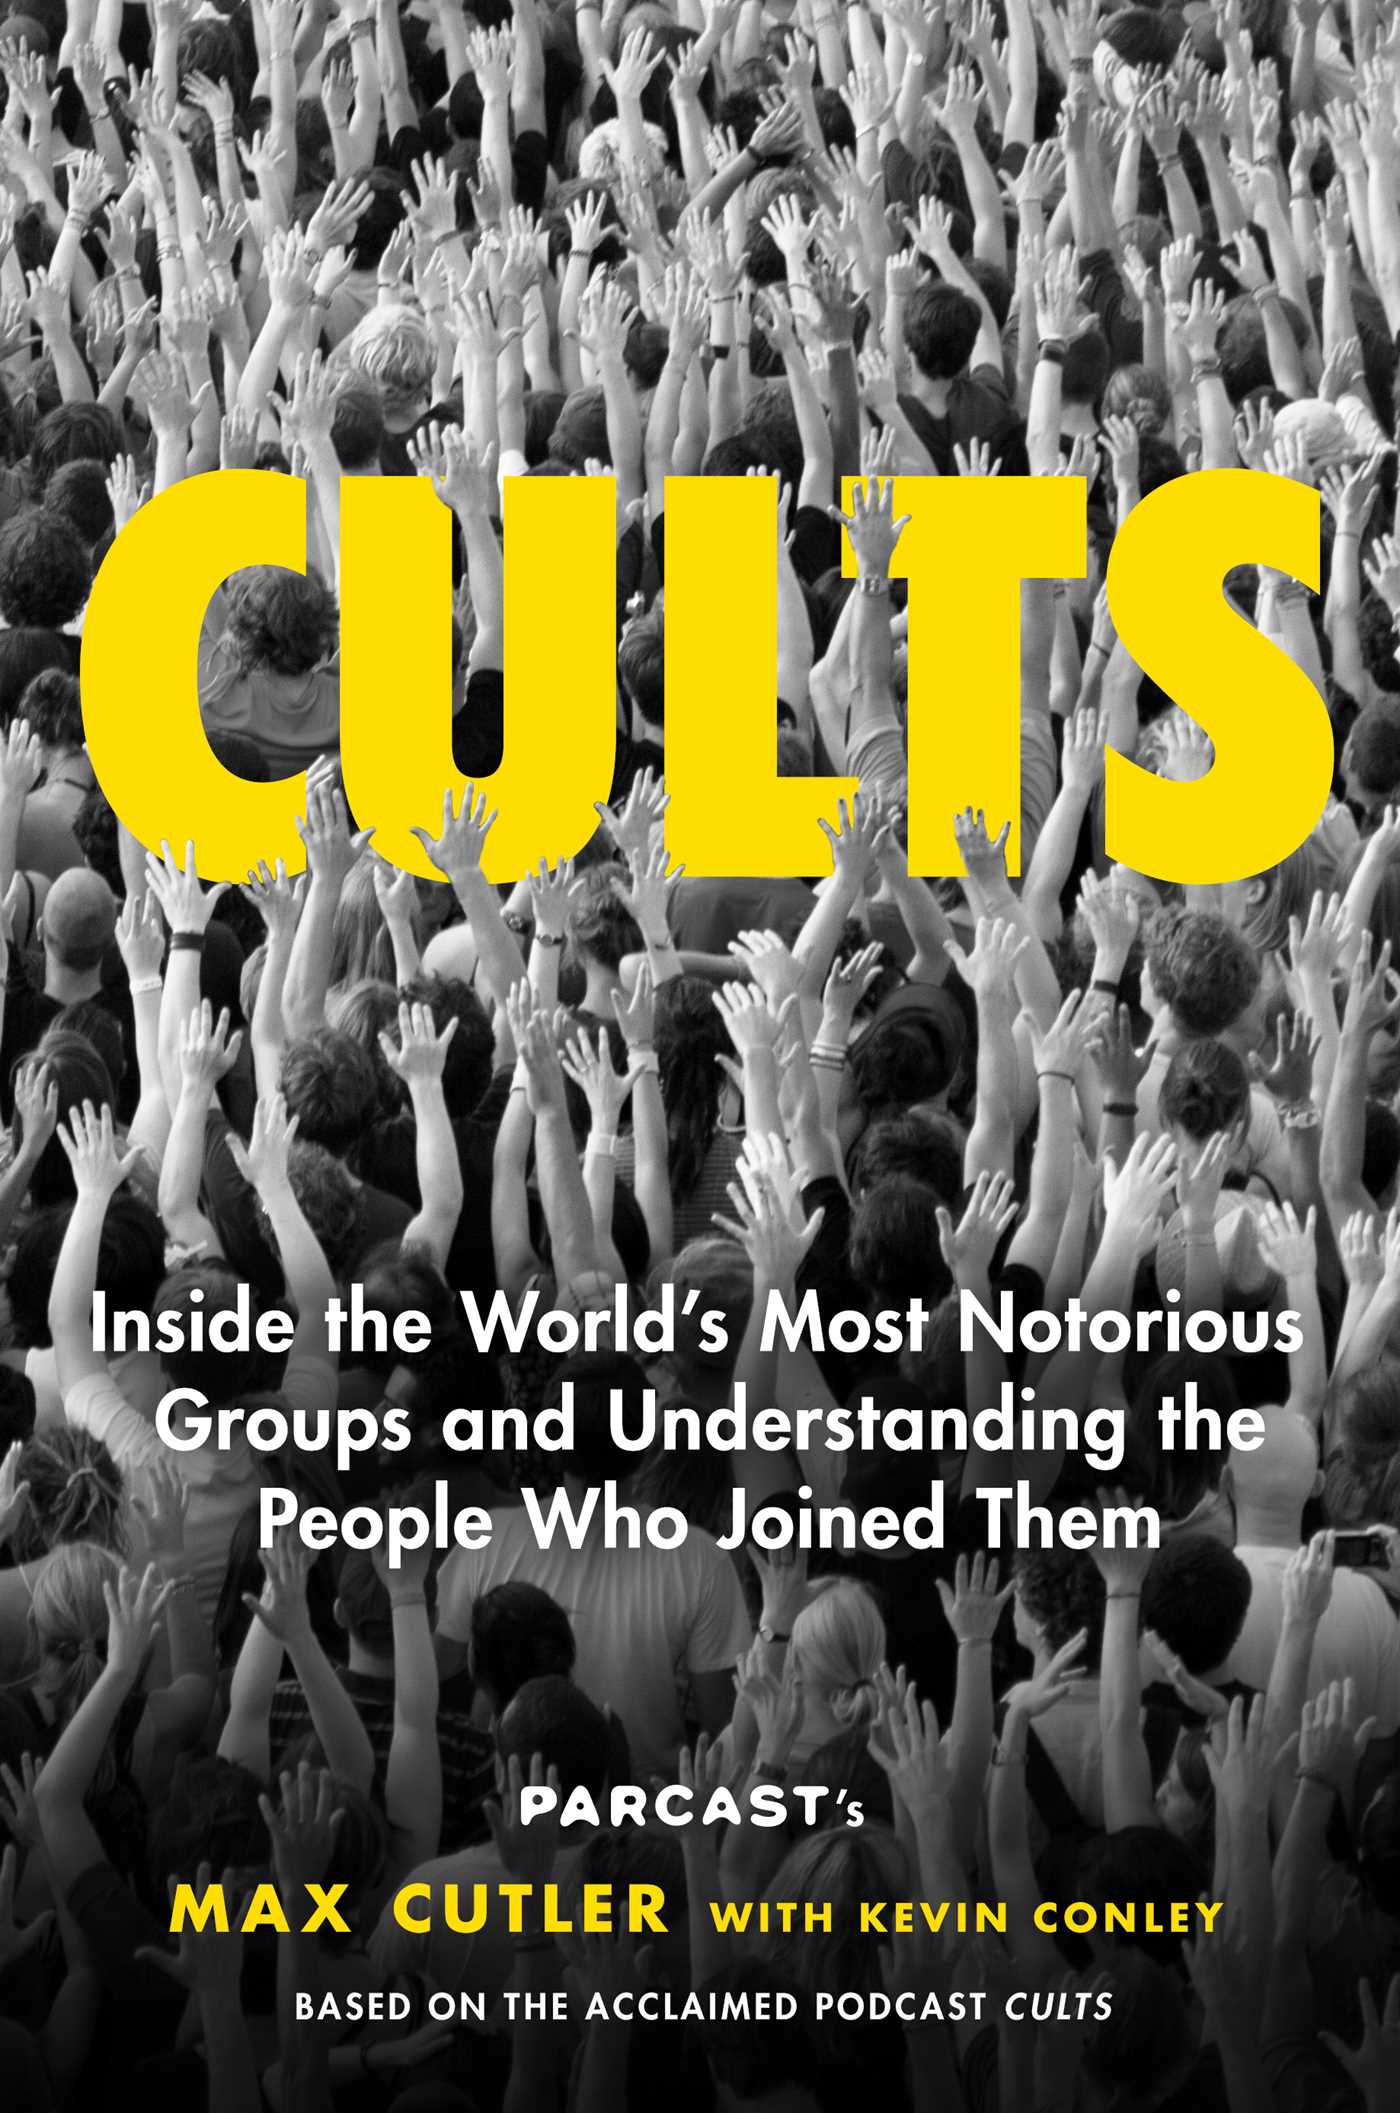 Cults: Inside the World's Most Notorious Groups and Understanding the People Who Joined Them books